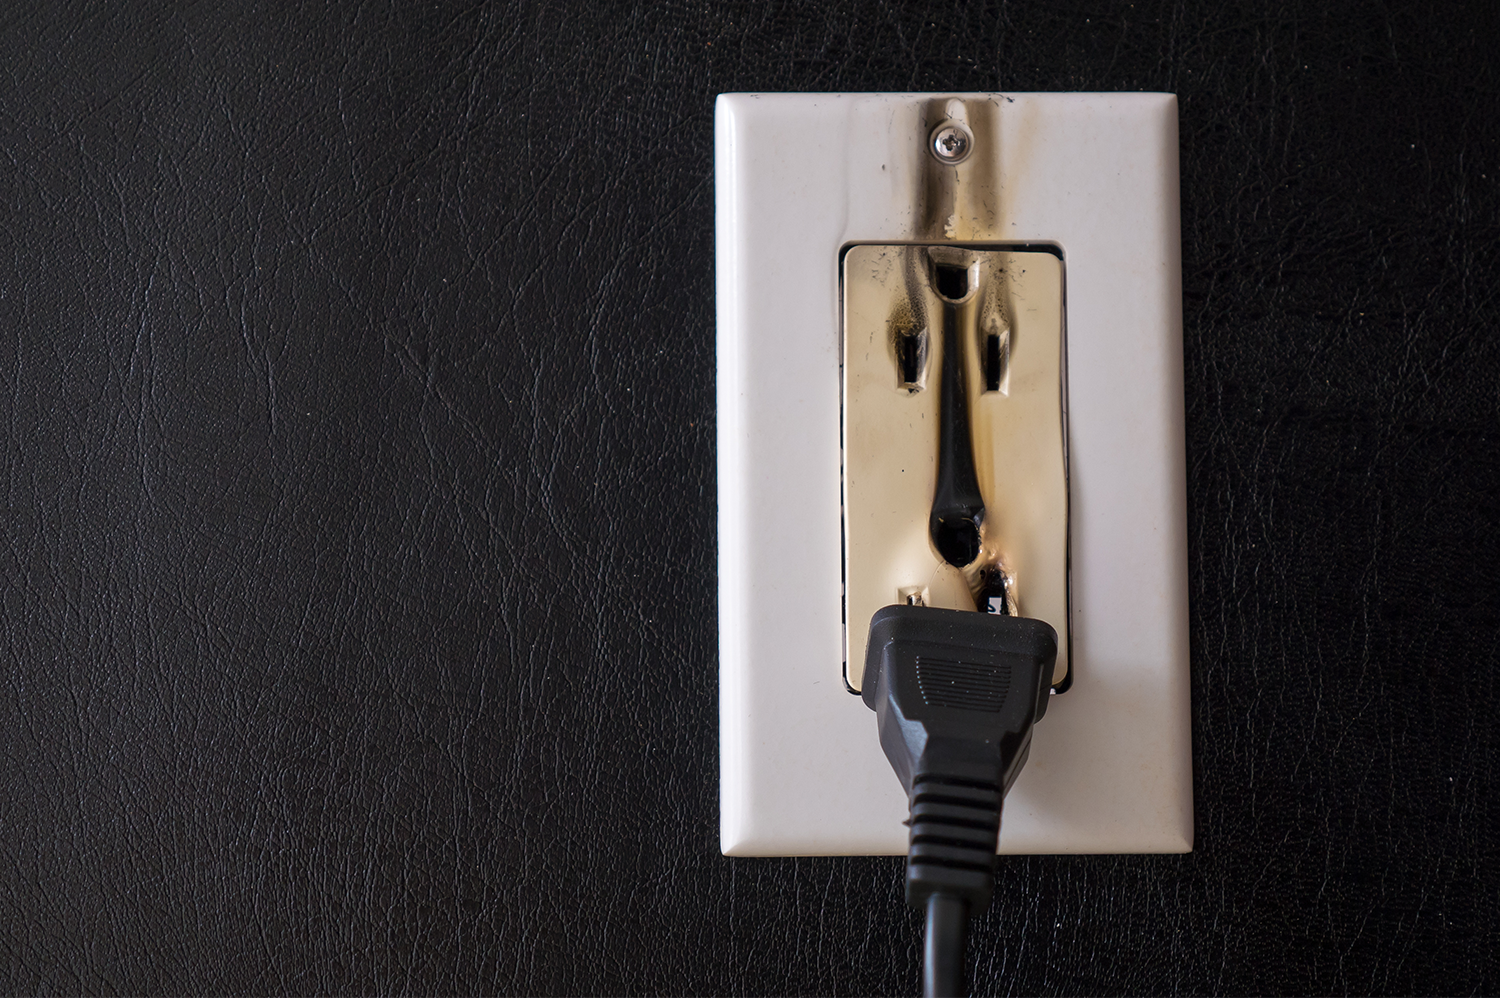 A white outlet on a black wall, with a black cord coming out of it. Black smoke is billowing from the outlet holes, indicating there's an electrical fire